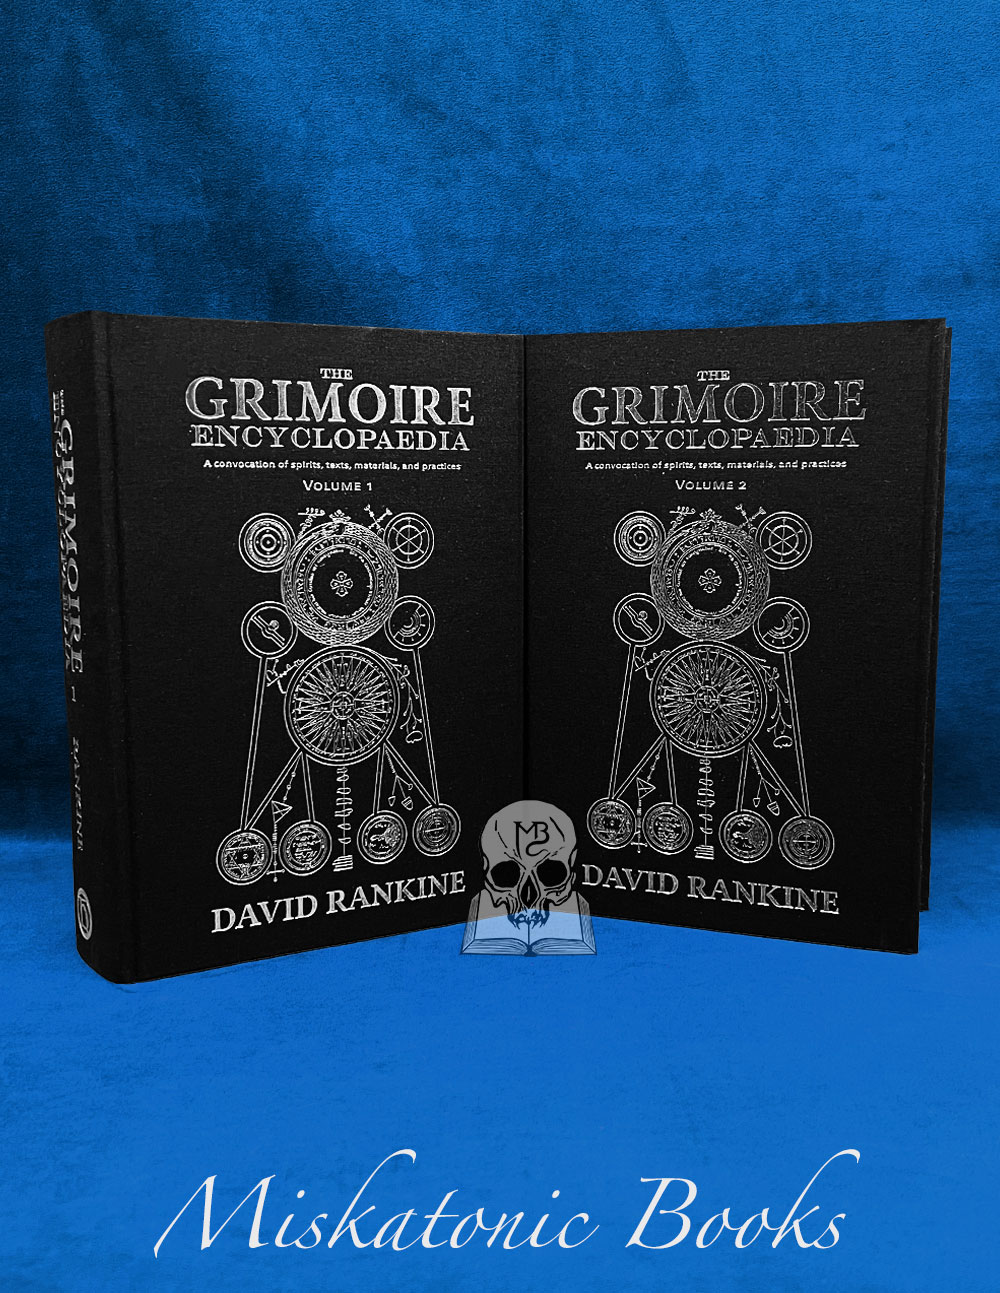 THE GRIMOIRE ENCYCLOPAEDIA: A convocation of spirits, texts